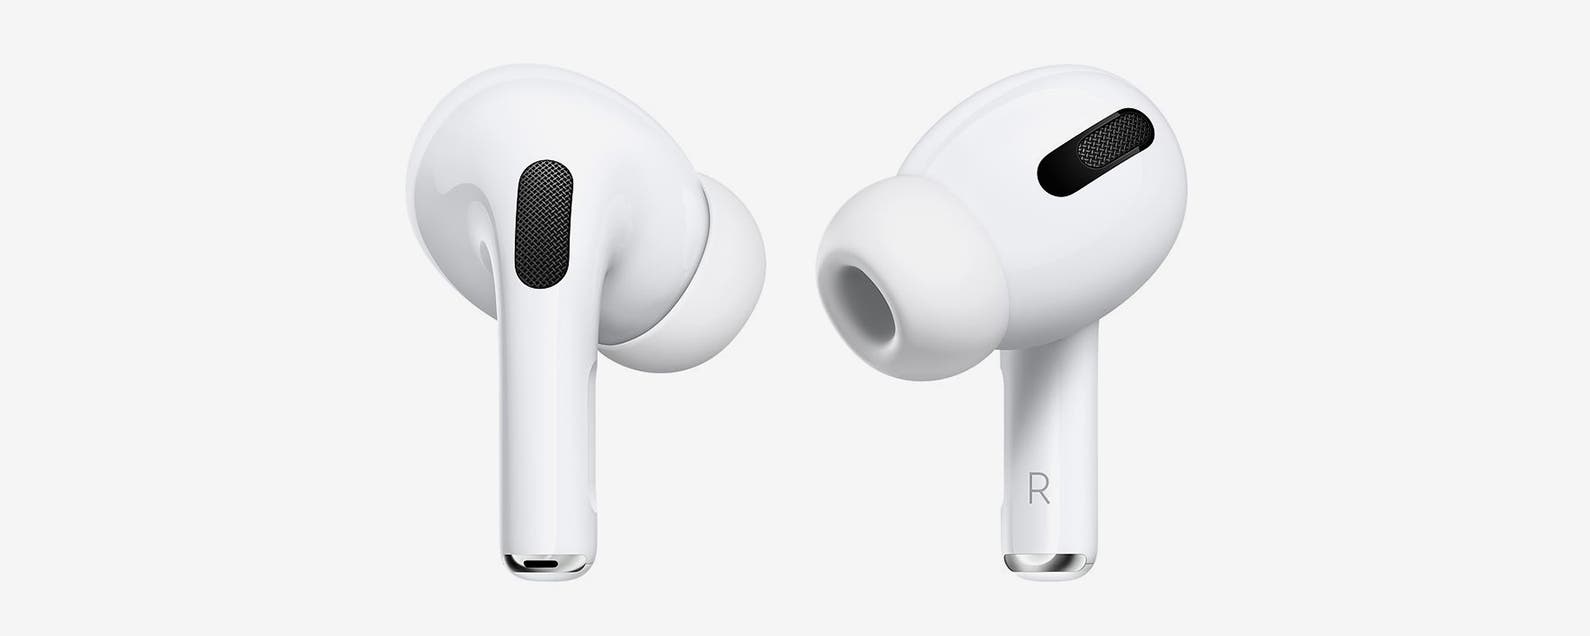 taxa spil kommentar Why Your AirPods Keep Pausing & Disconnecting When Removed